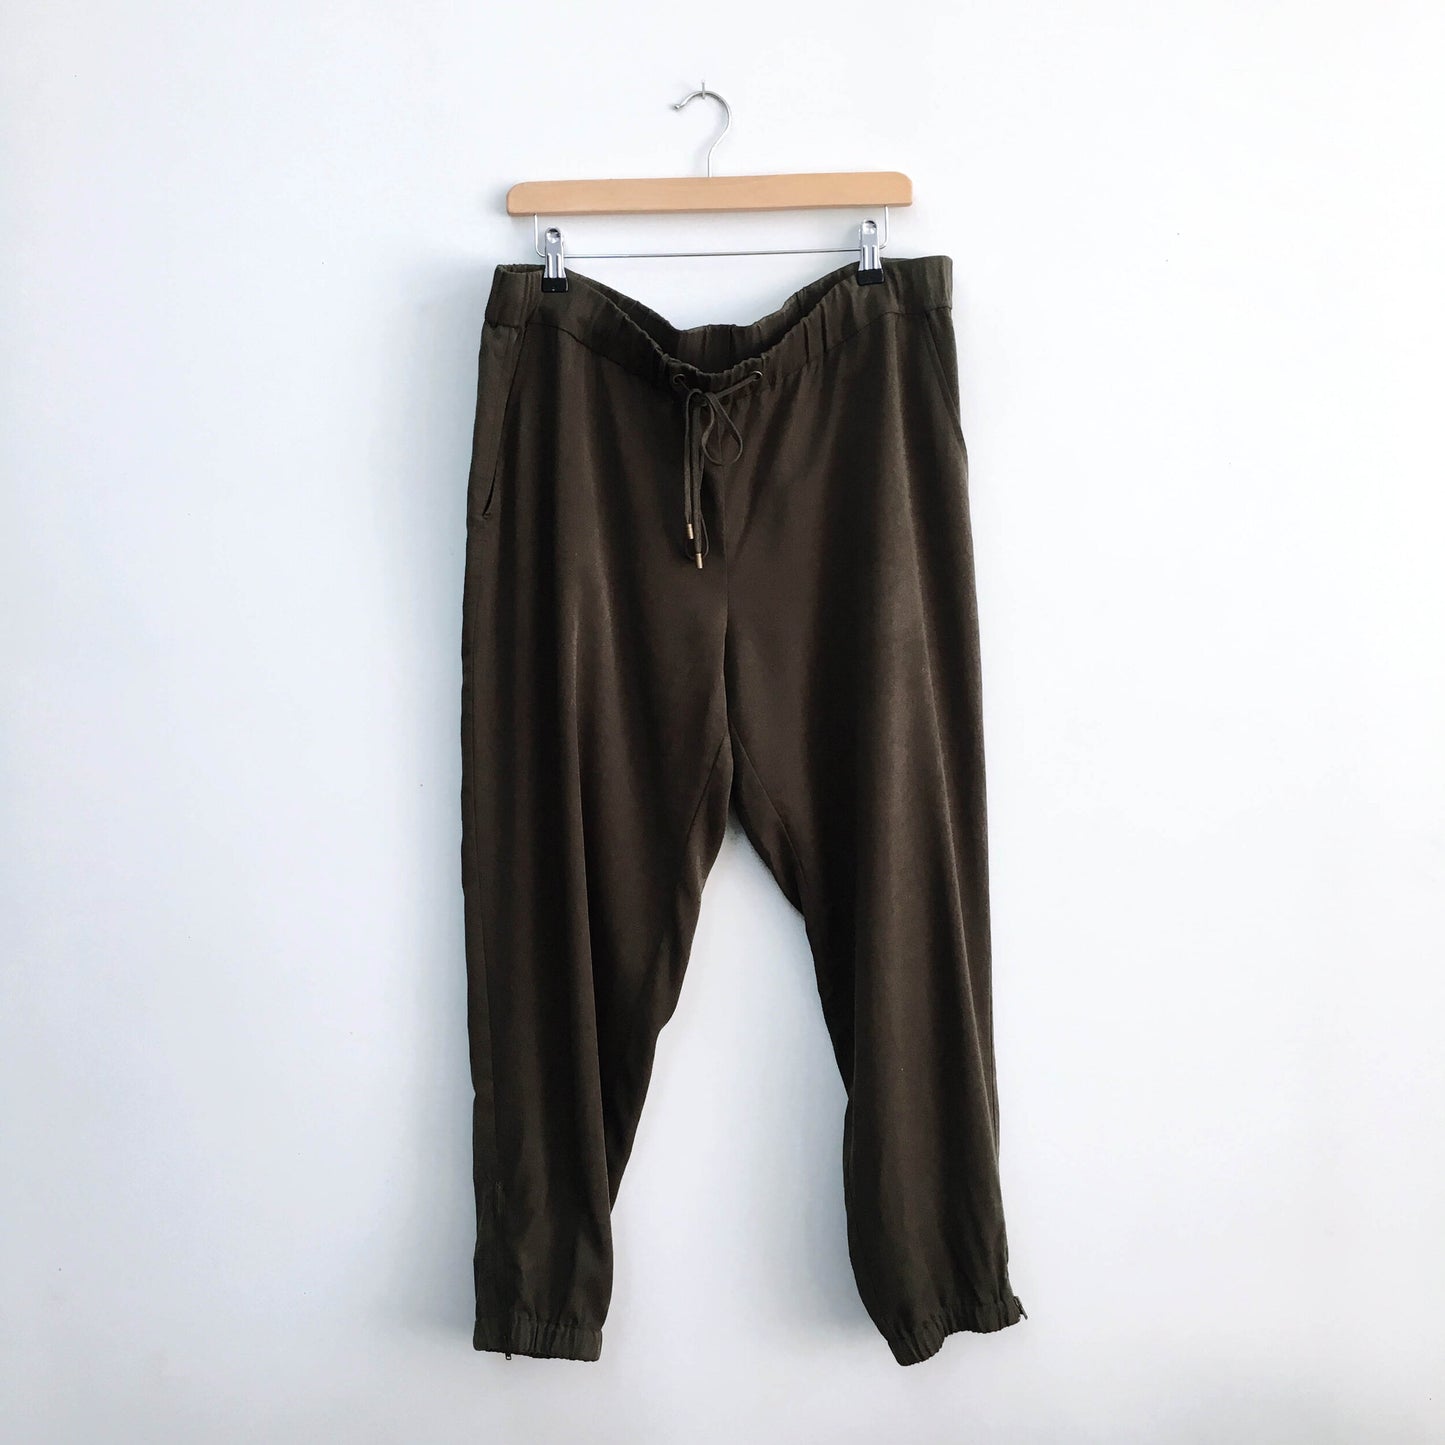 Eileen Fisher drawstring joggers - size Large